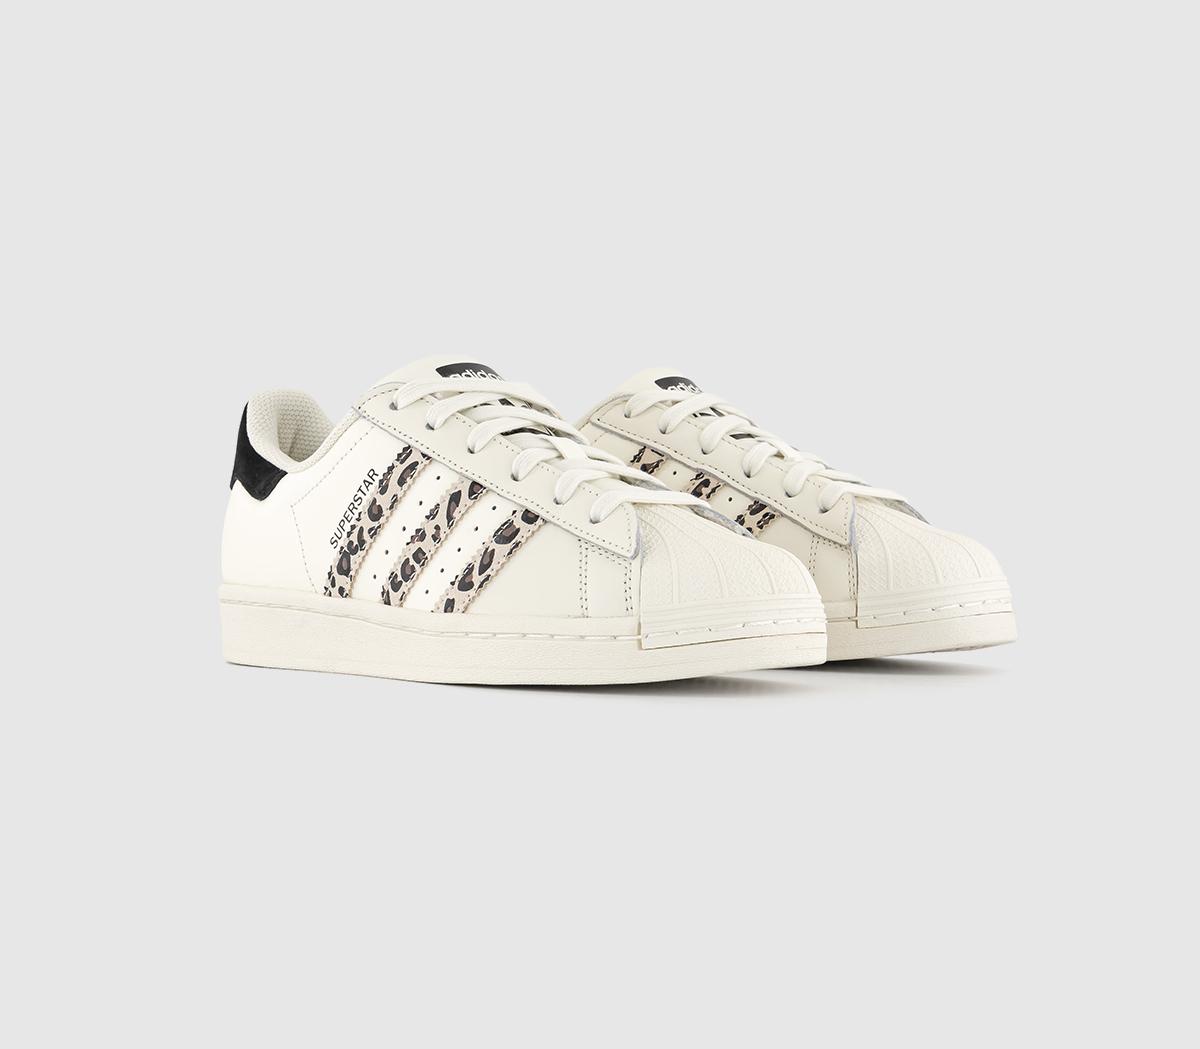 Adidas Womens Superstar Trainers Offwhite Black, 4